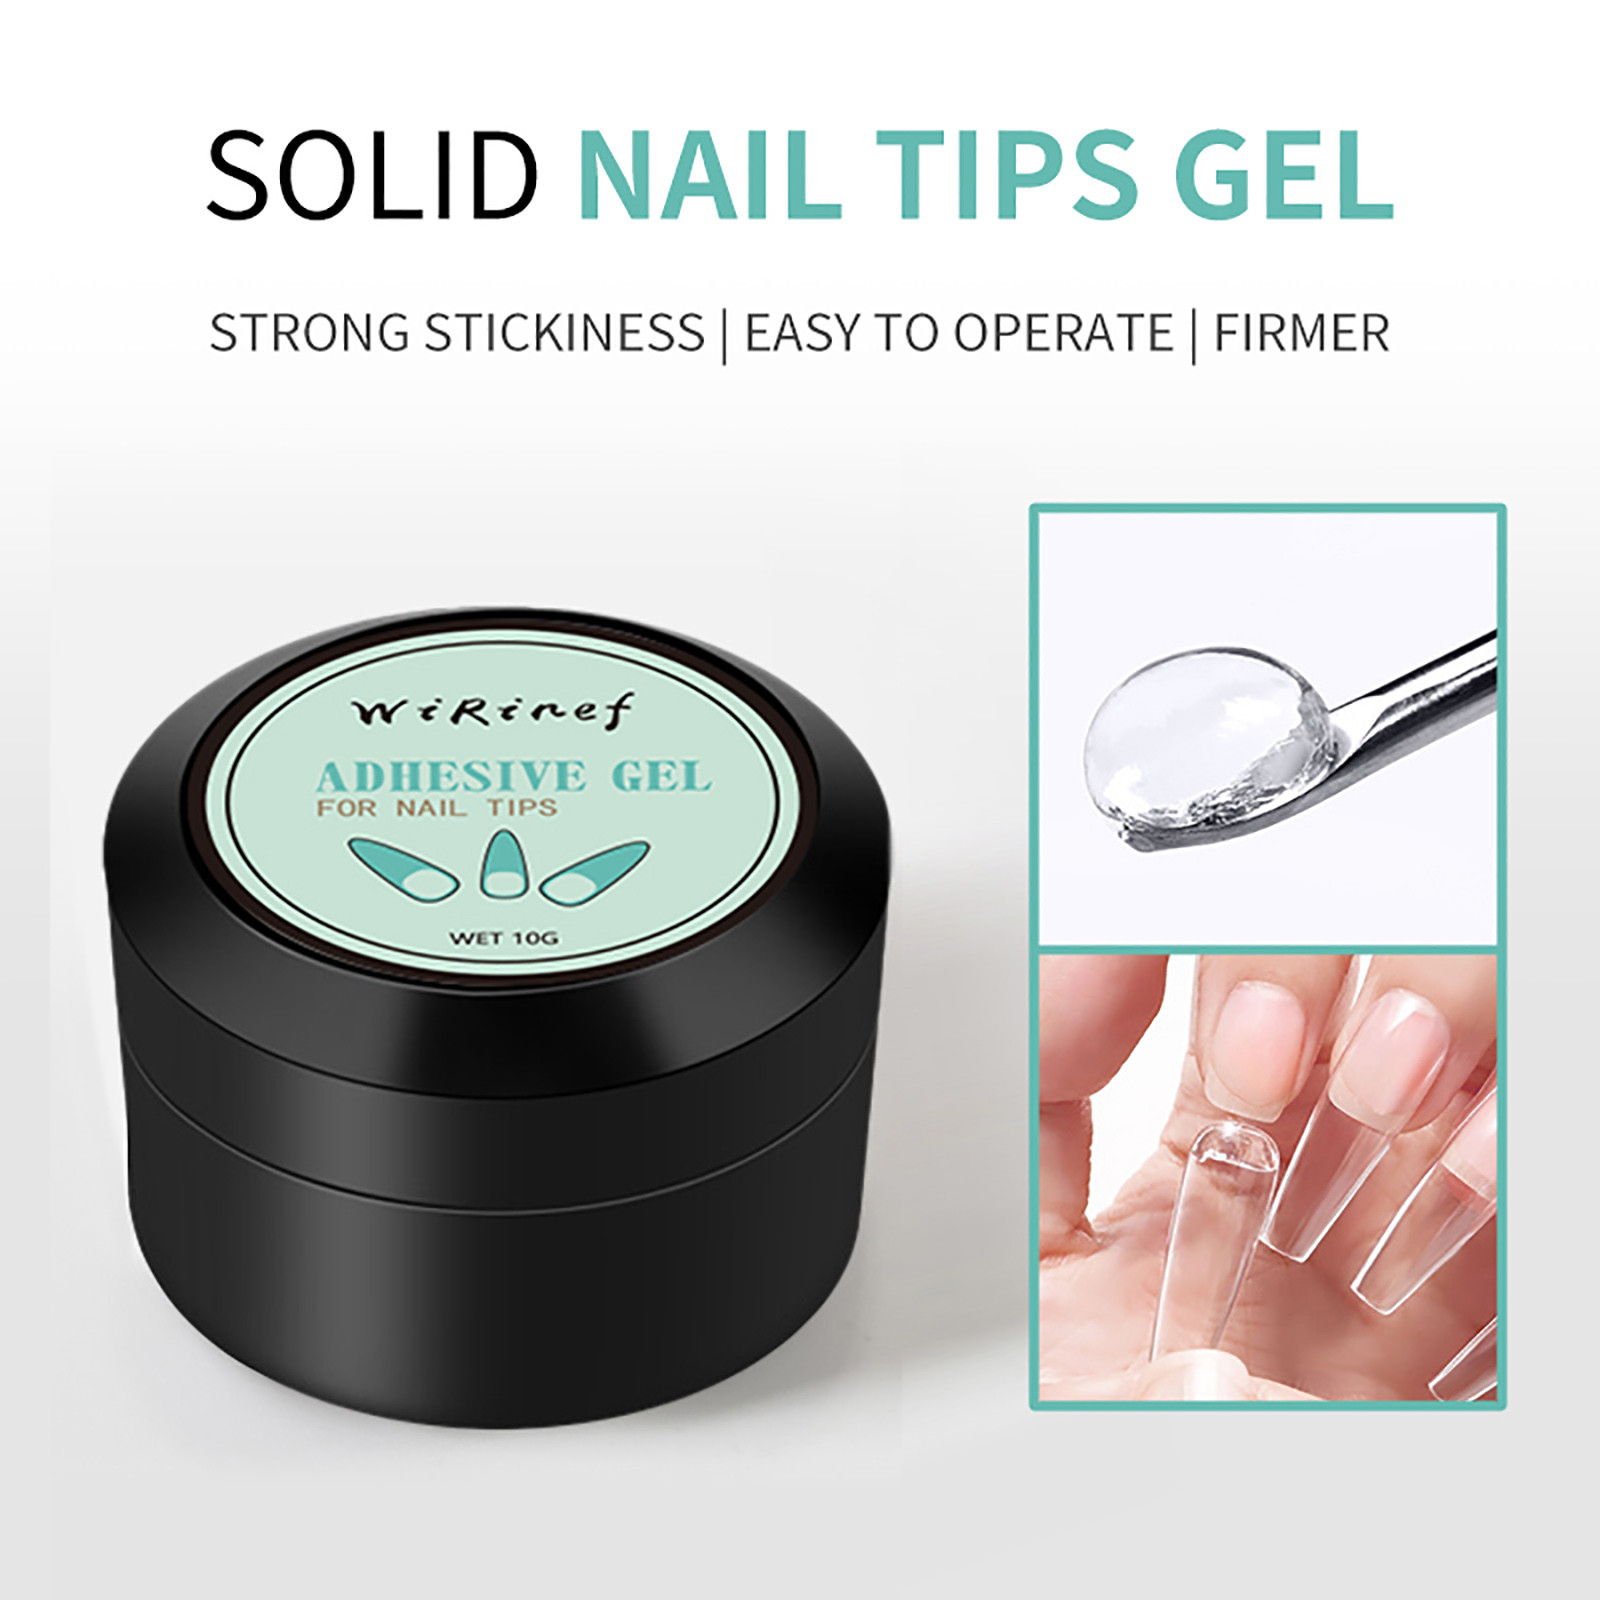 Solid glue is the key Why are my nails so strong and have no bubbles!W, Solid Nail Glue